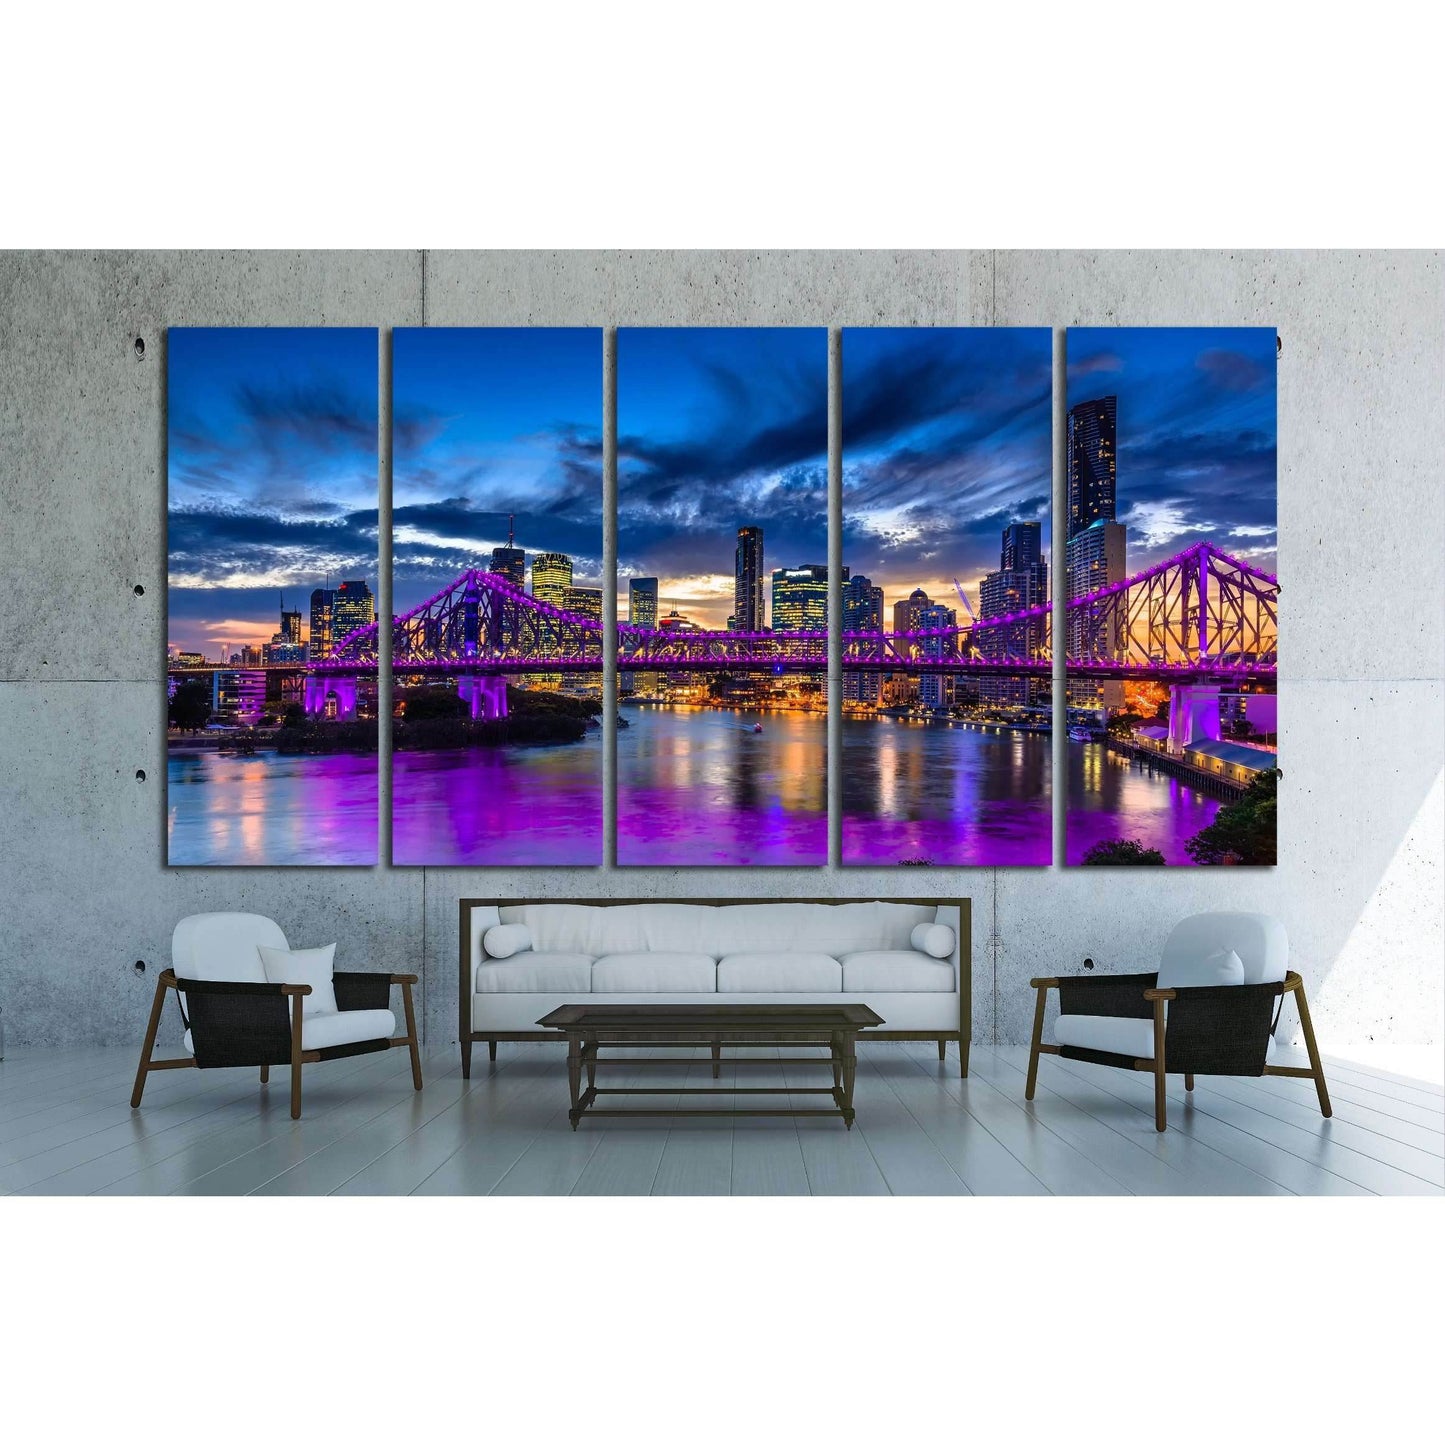 Vibrant night time panorama of Brisbane city with purple lights on Story Bridge, Australia №2391 Ready to Hang Canvas PrintCanvas art arrives ready to hang, with hanging accessories included and no additional framing required. Every canvas print is hand-c